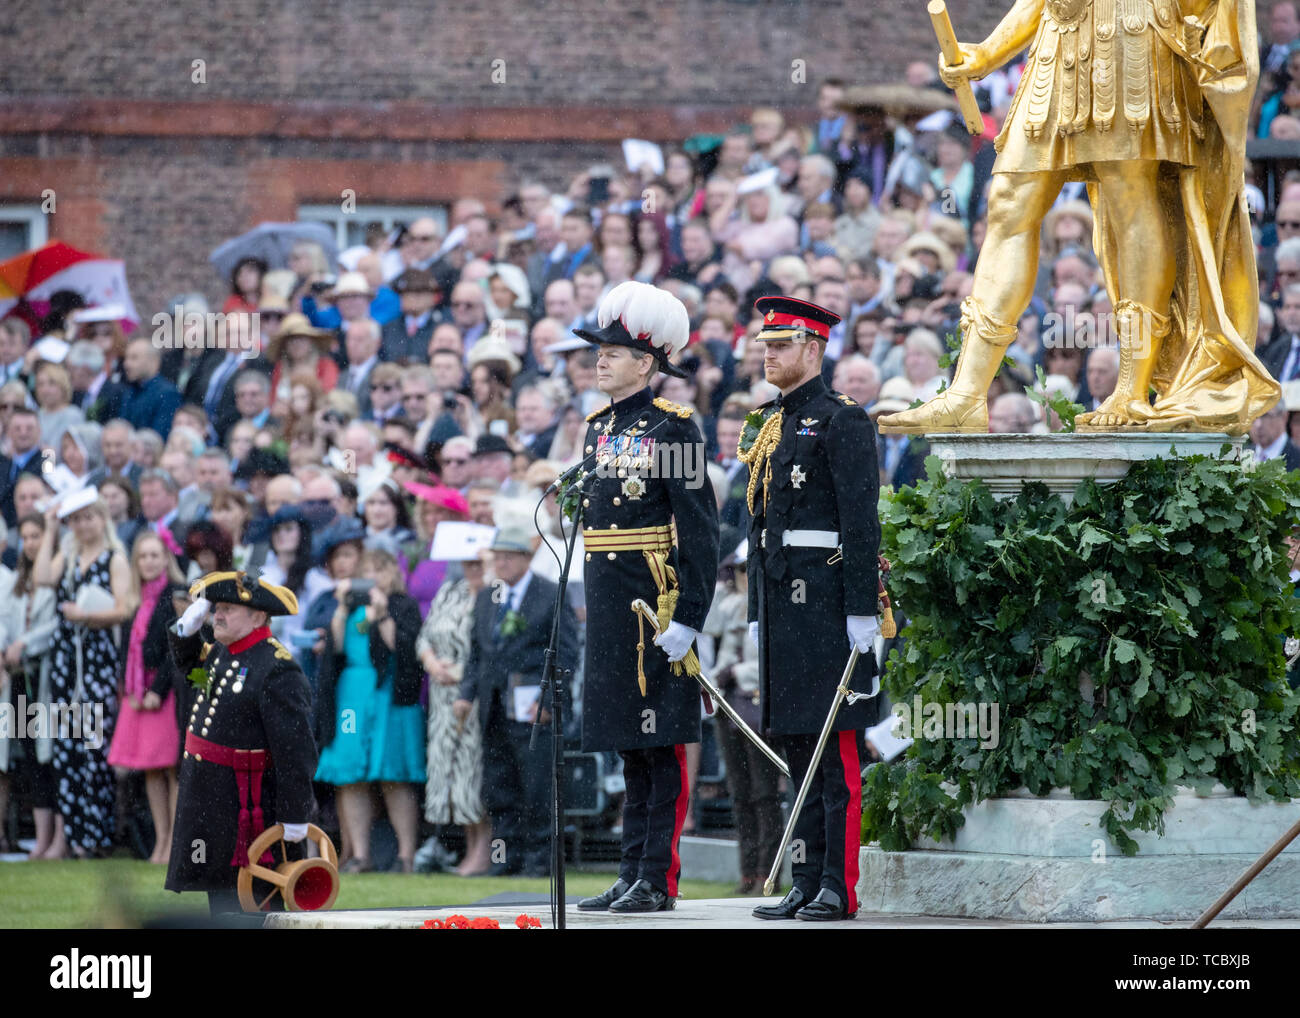 London, UK. 06th June, 2019. Prince Harry, Duke of Sussex attends, as reviewing officer, the annual Founder's Day Parade at the Royal Hospital Chelsea in London, England. JUNE 6th 2019. Credit: Matrix/MediaPunch ***FOR USA ONLY*** REF: JRD 192074 Credit: MediaPunch Inc/Alamy Live News Stock Photo